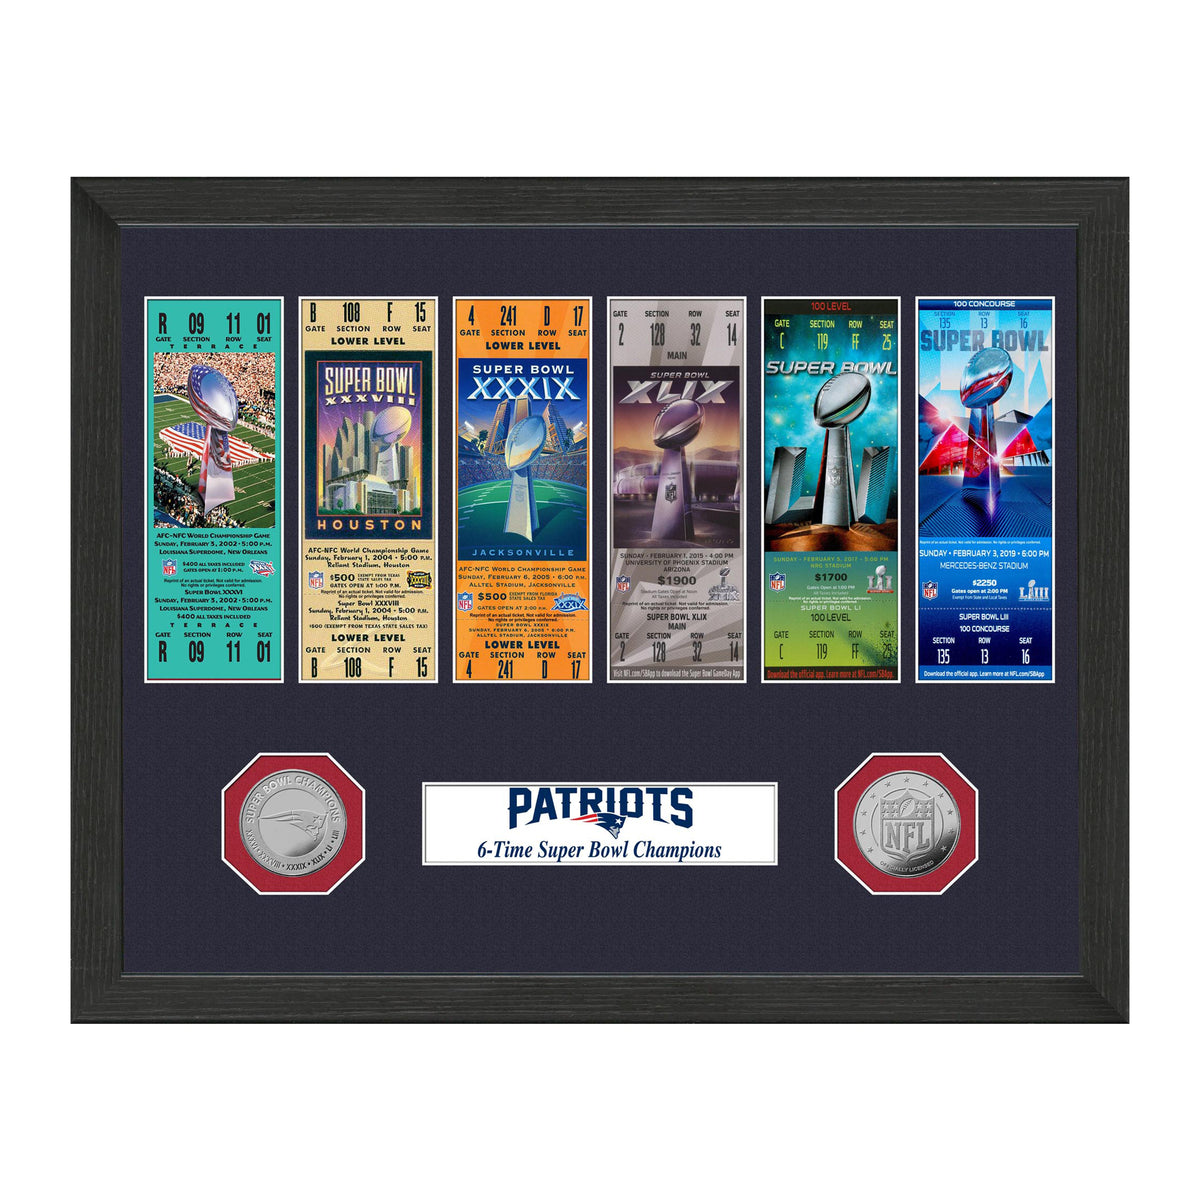 New England Patriots Super Bowl Champions Ticket Collections Frame